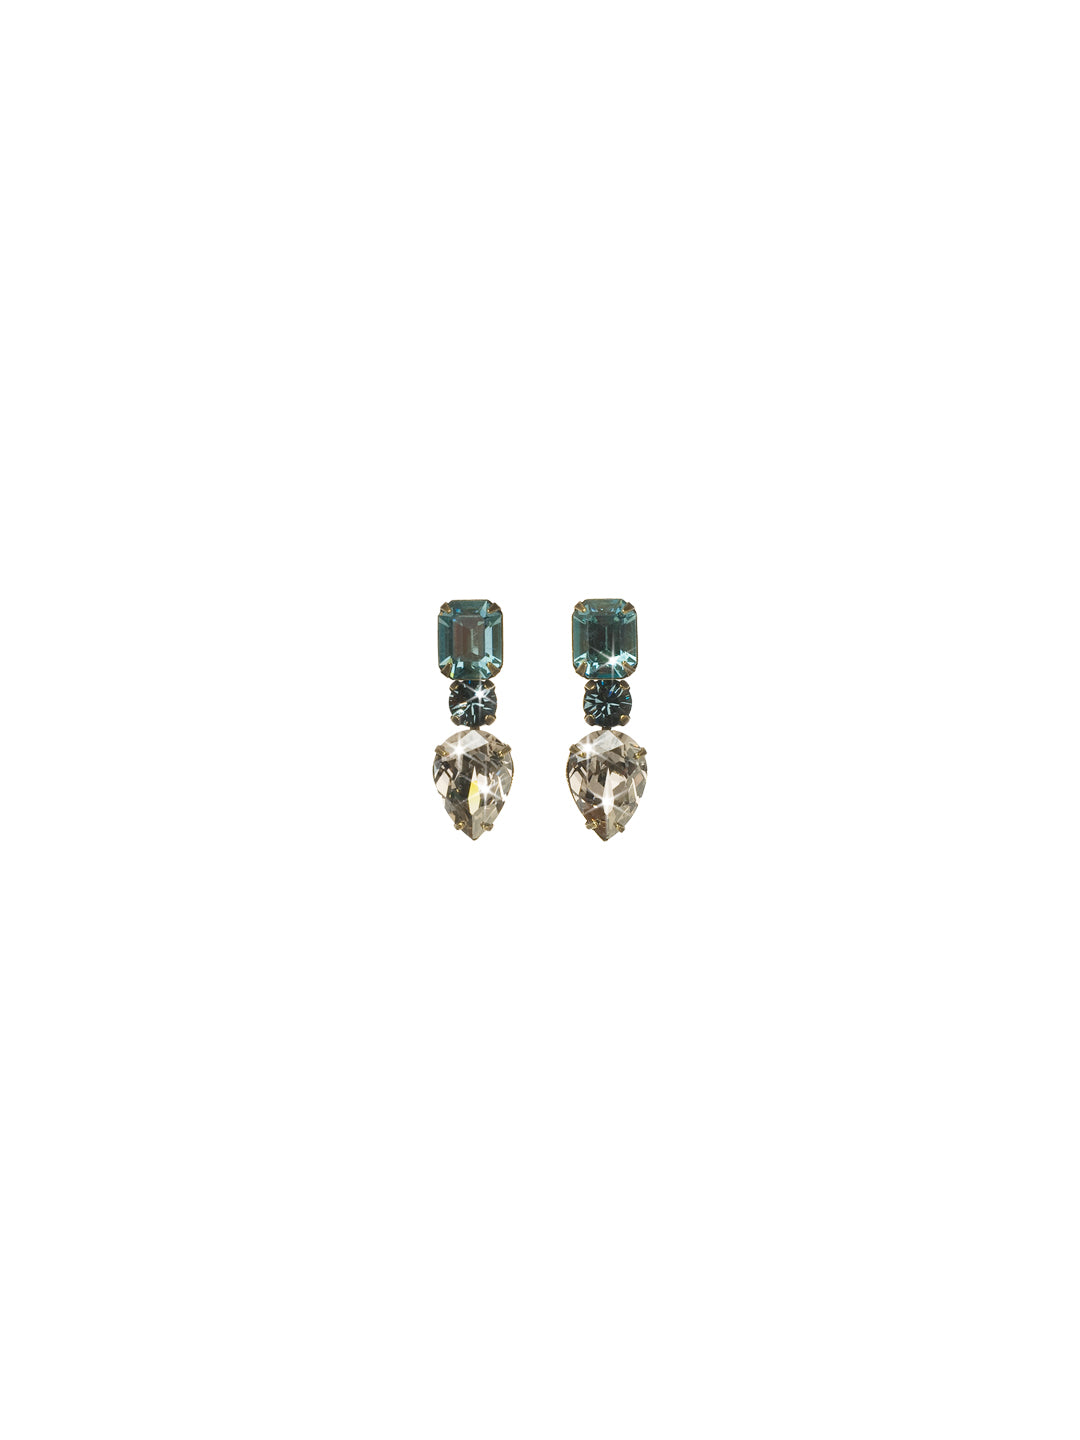 Canary Dangle Earrings - ECR46AGAFG - <p>Indulge in sparkle. Bold teardrops give these petite posts a pop of glamour! From Sorrelli's Afterglow collection in our Antique Gold-tone finish.</p>